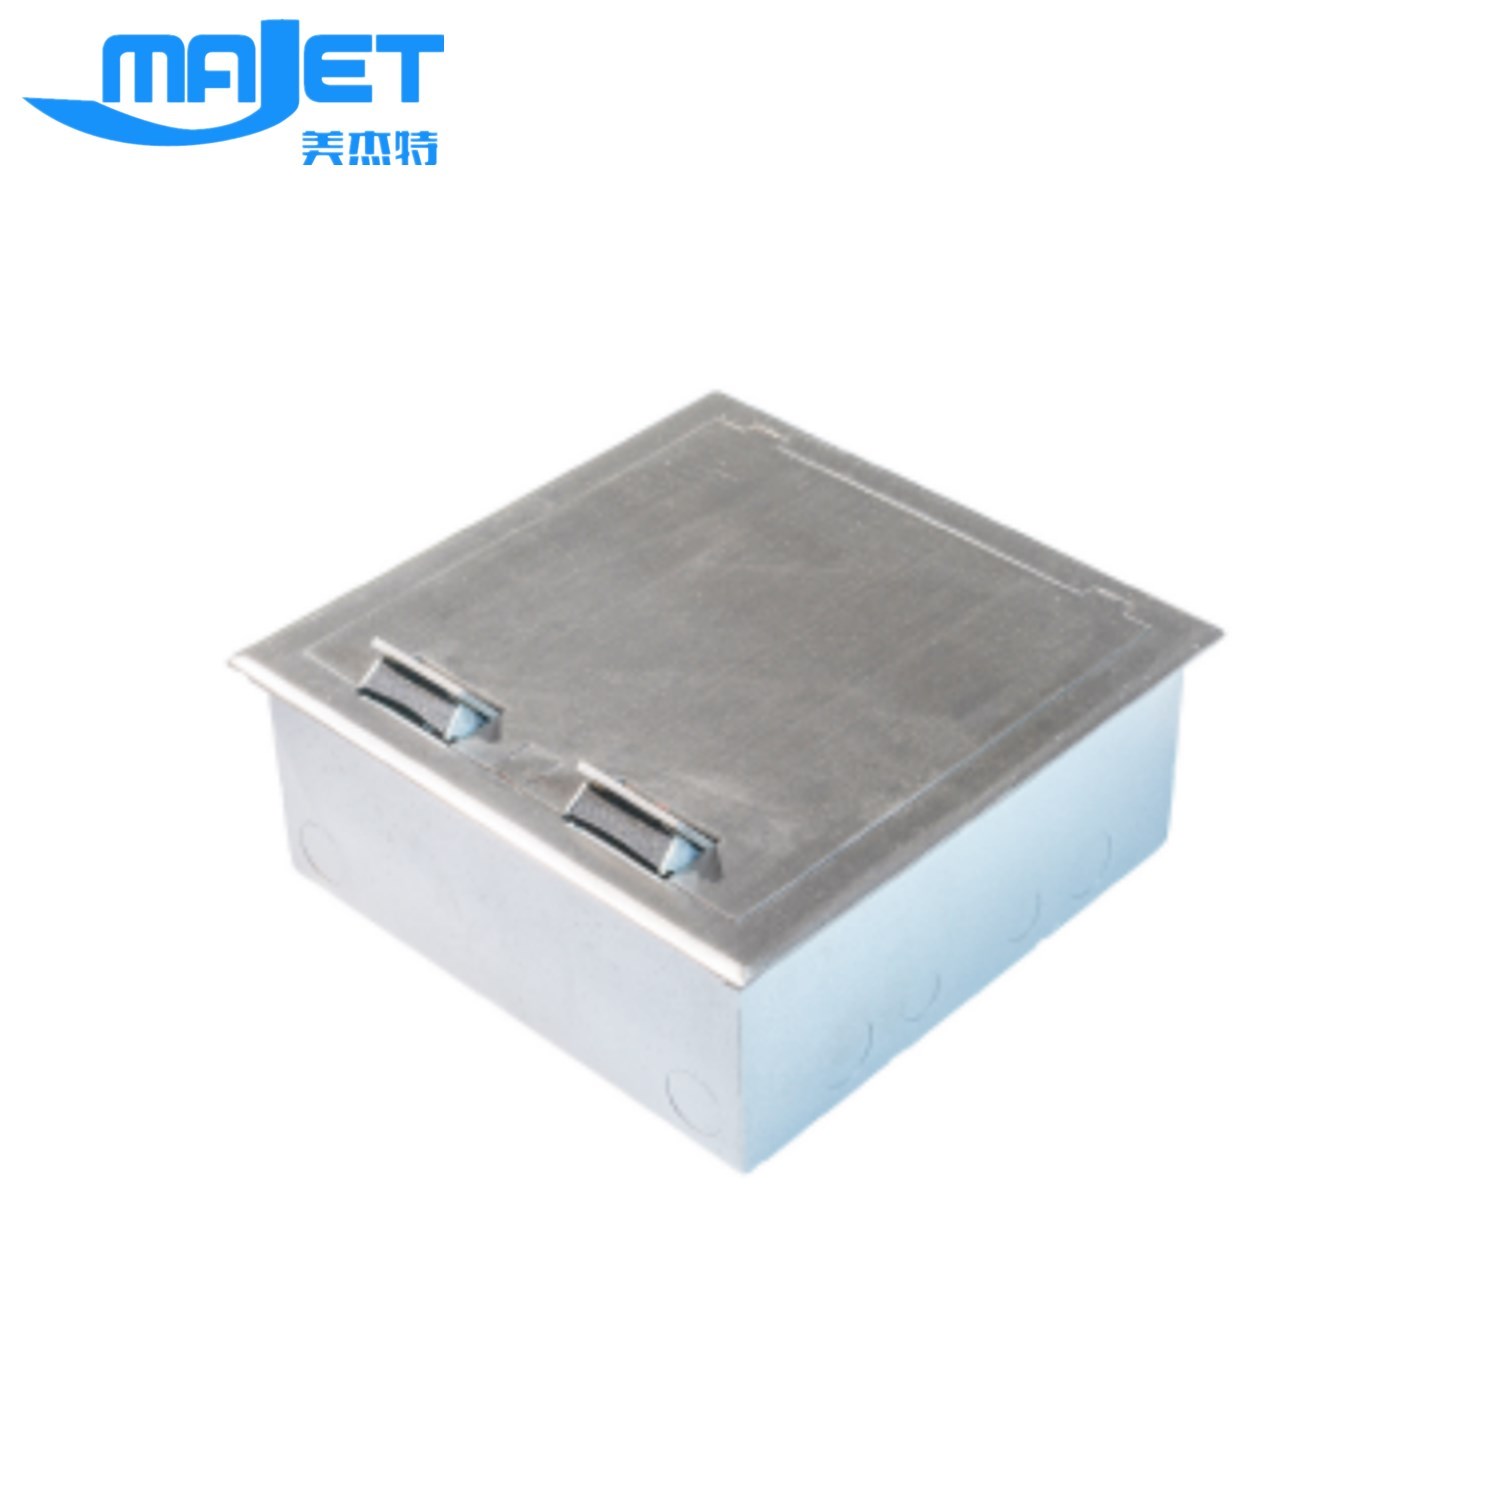 Raised Access Floor box Electrical & Electronic outlet box system 